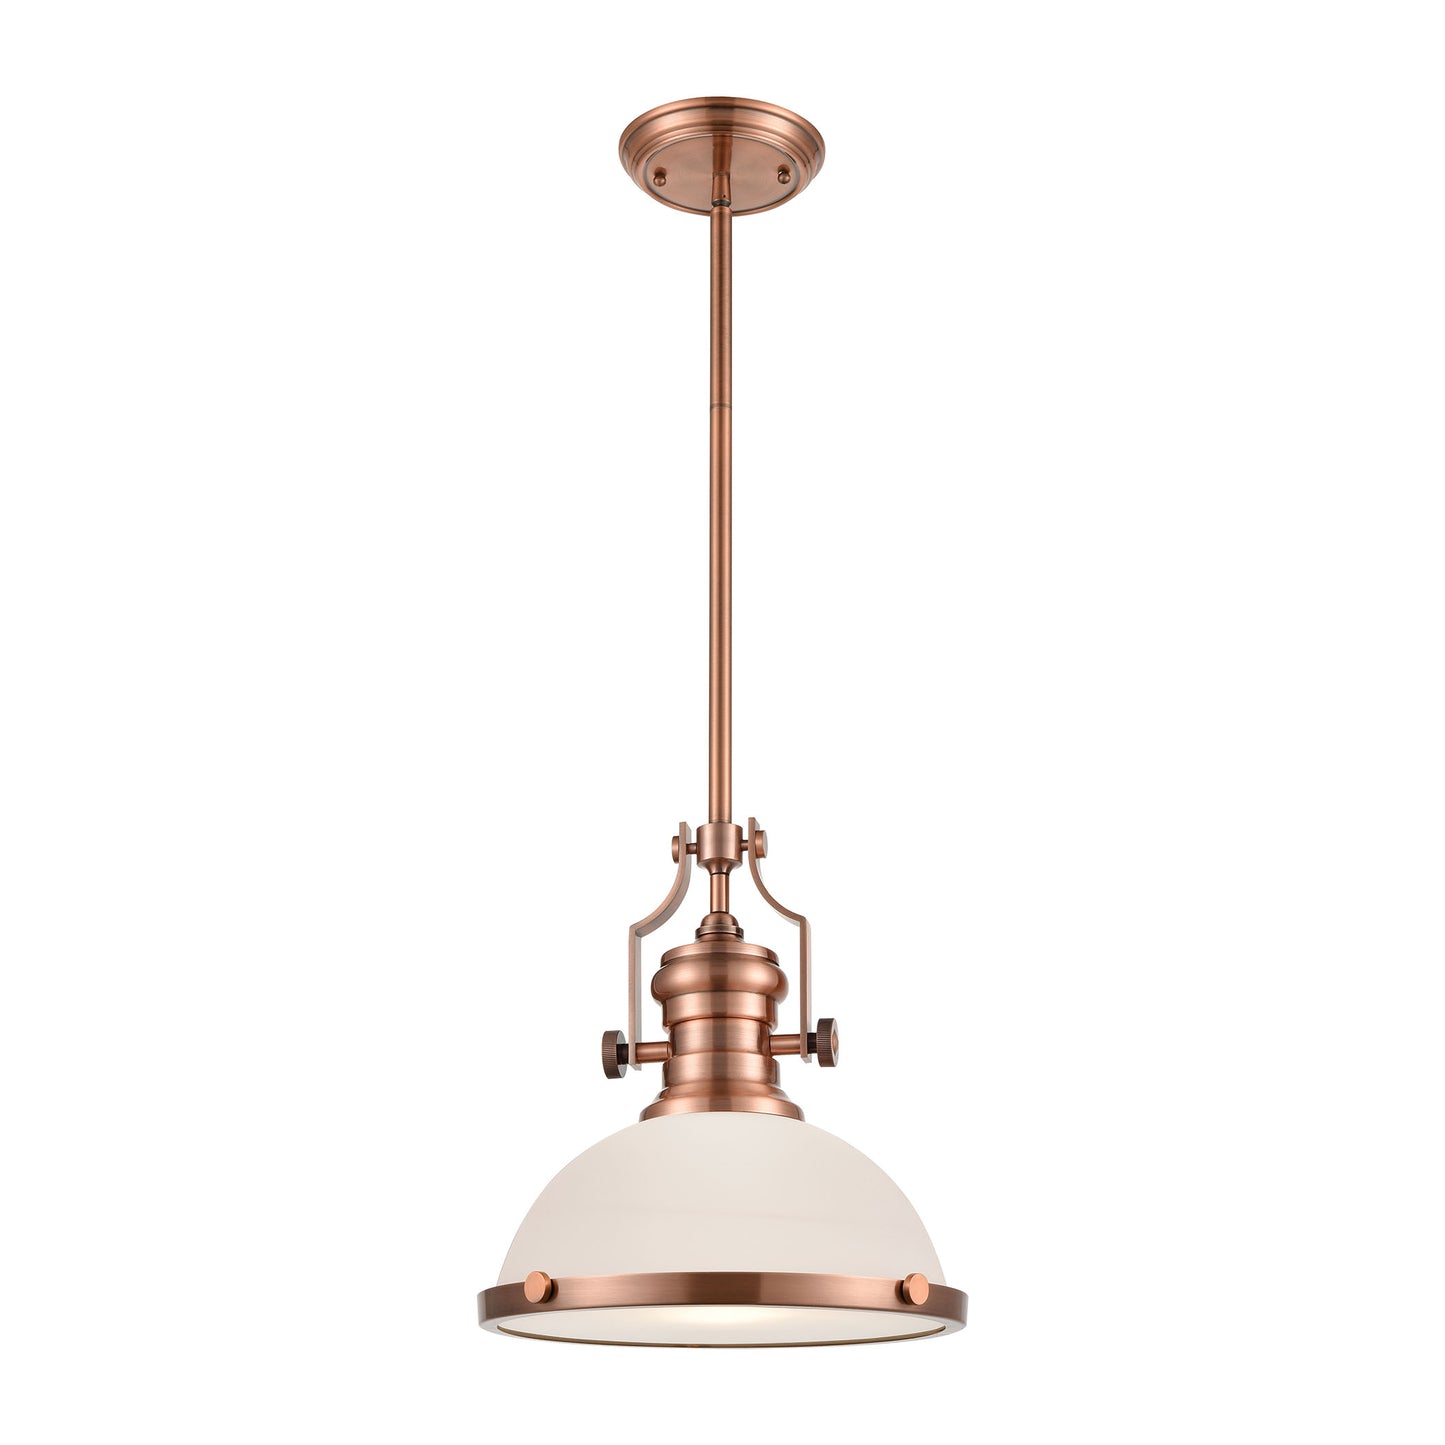 ELK Lighting 66143-1 - Chadwick 13" Wide 1-Light Pendant in Antique Copper with White Glass